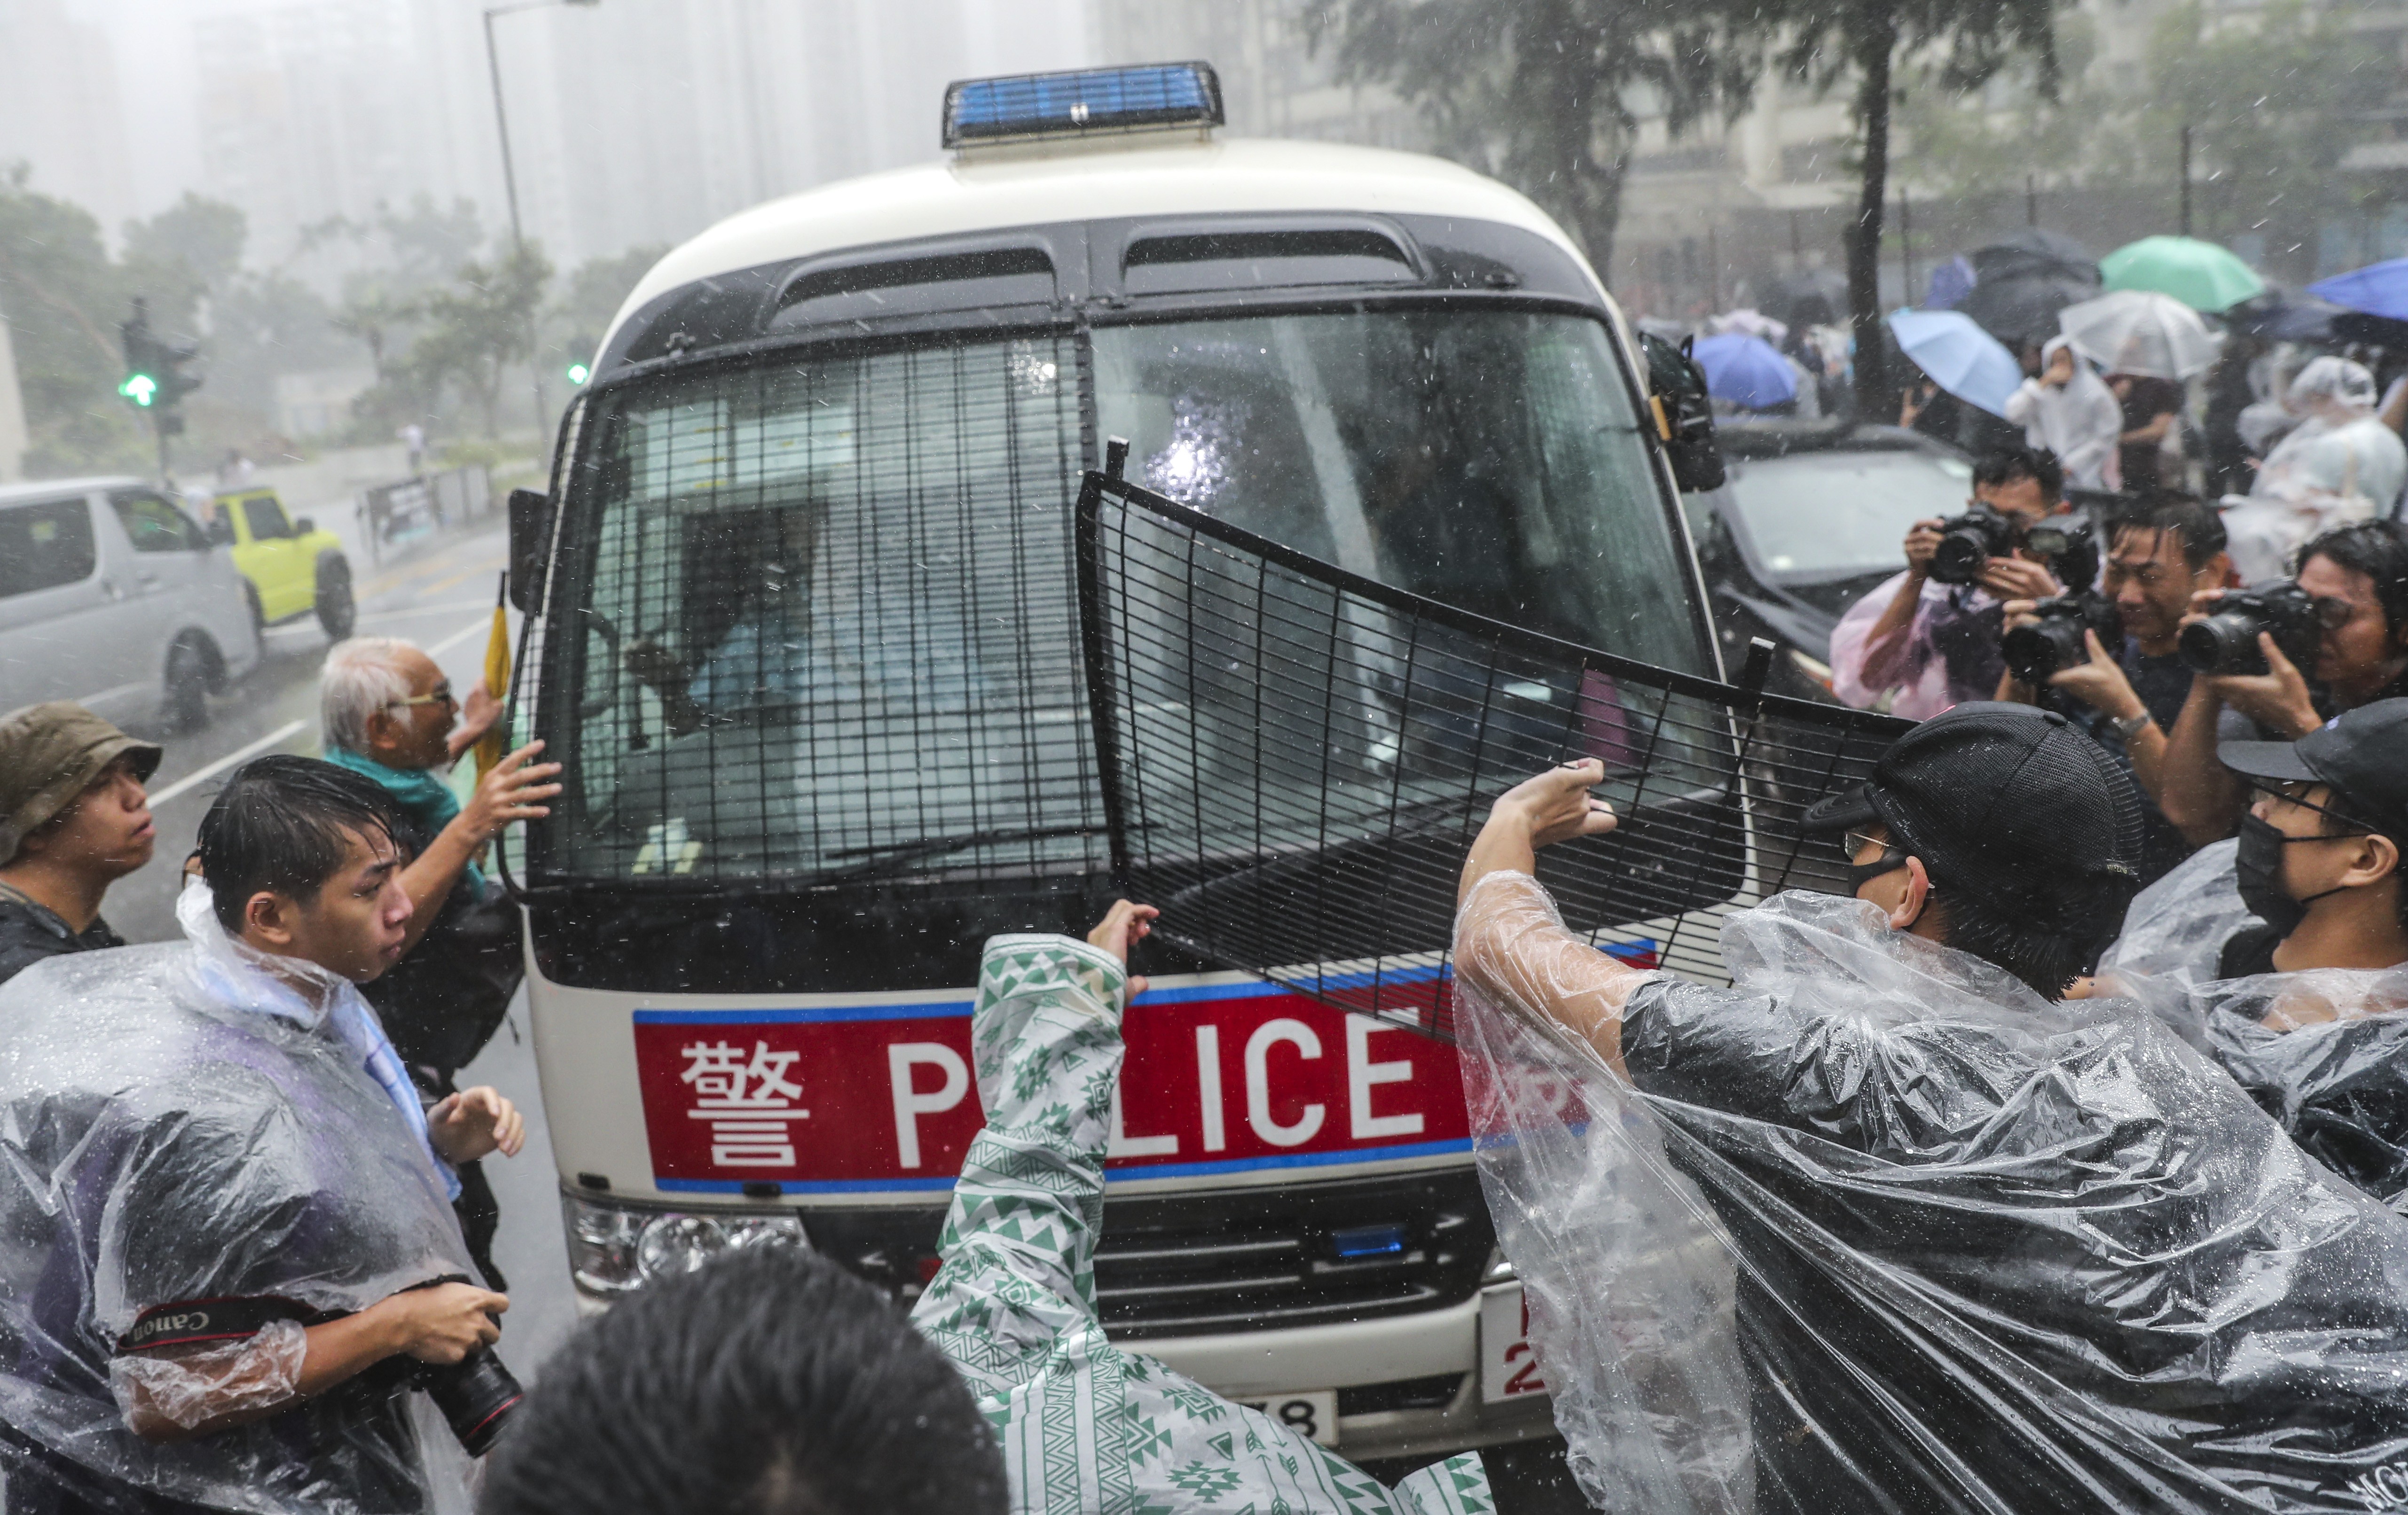 Protesters attack a police van outside the Eastern Court in Sai Wan Ho, where 44 people charged for rioting appeared before magistrates on Wednesday. Photo: Sam Tsang